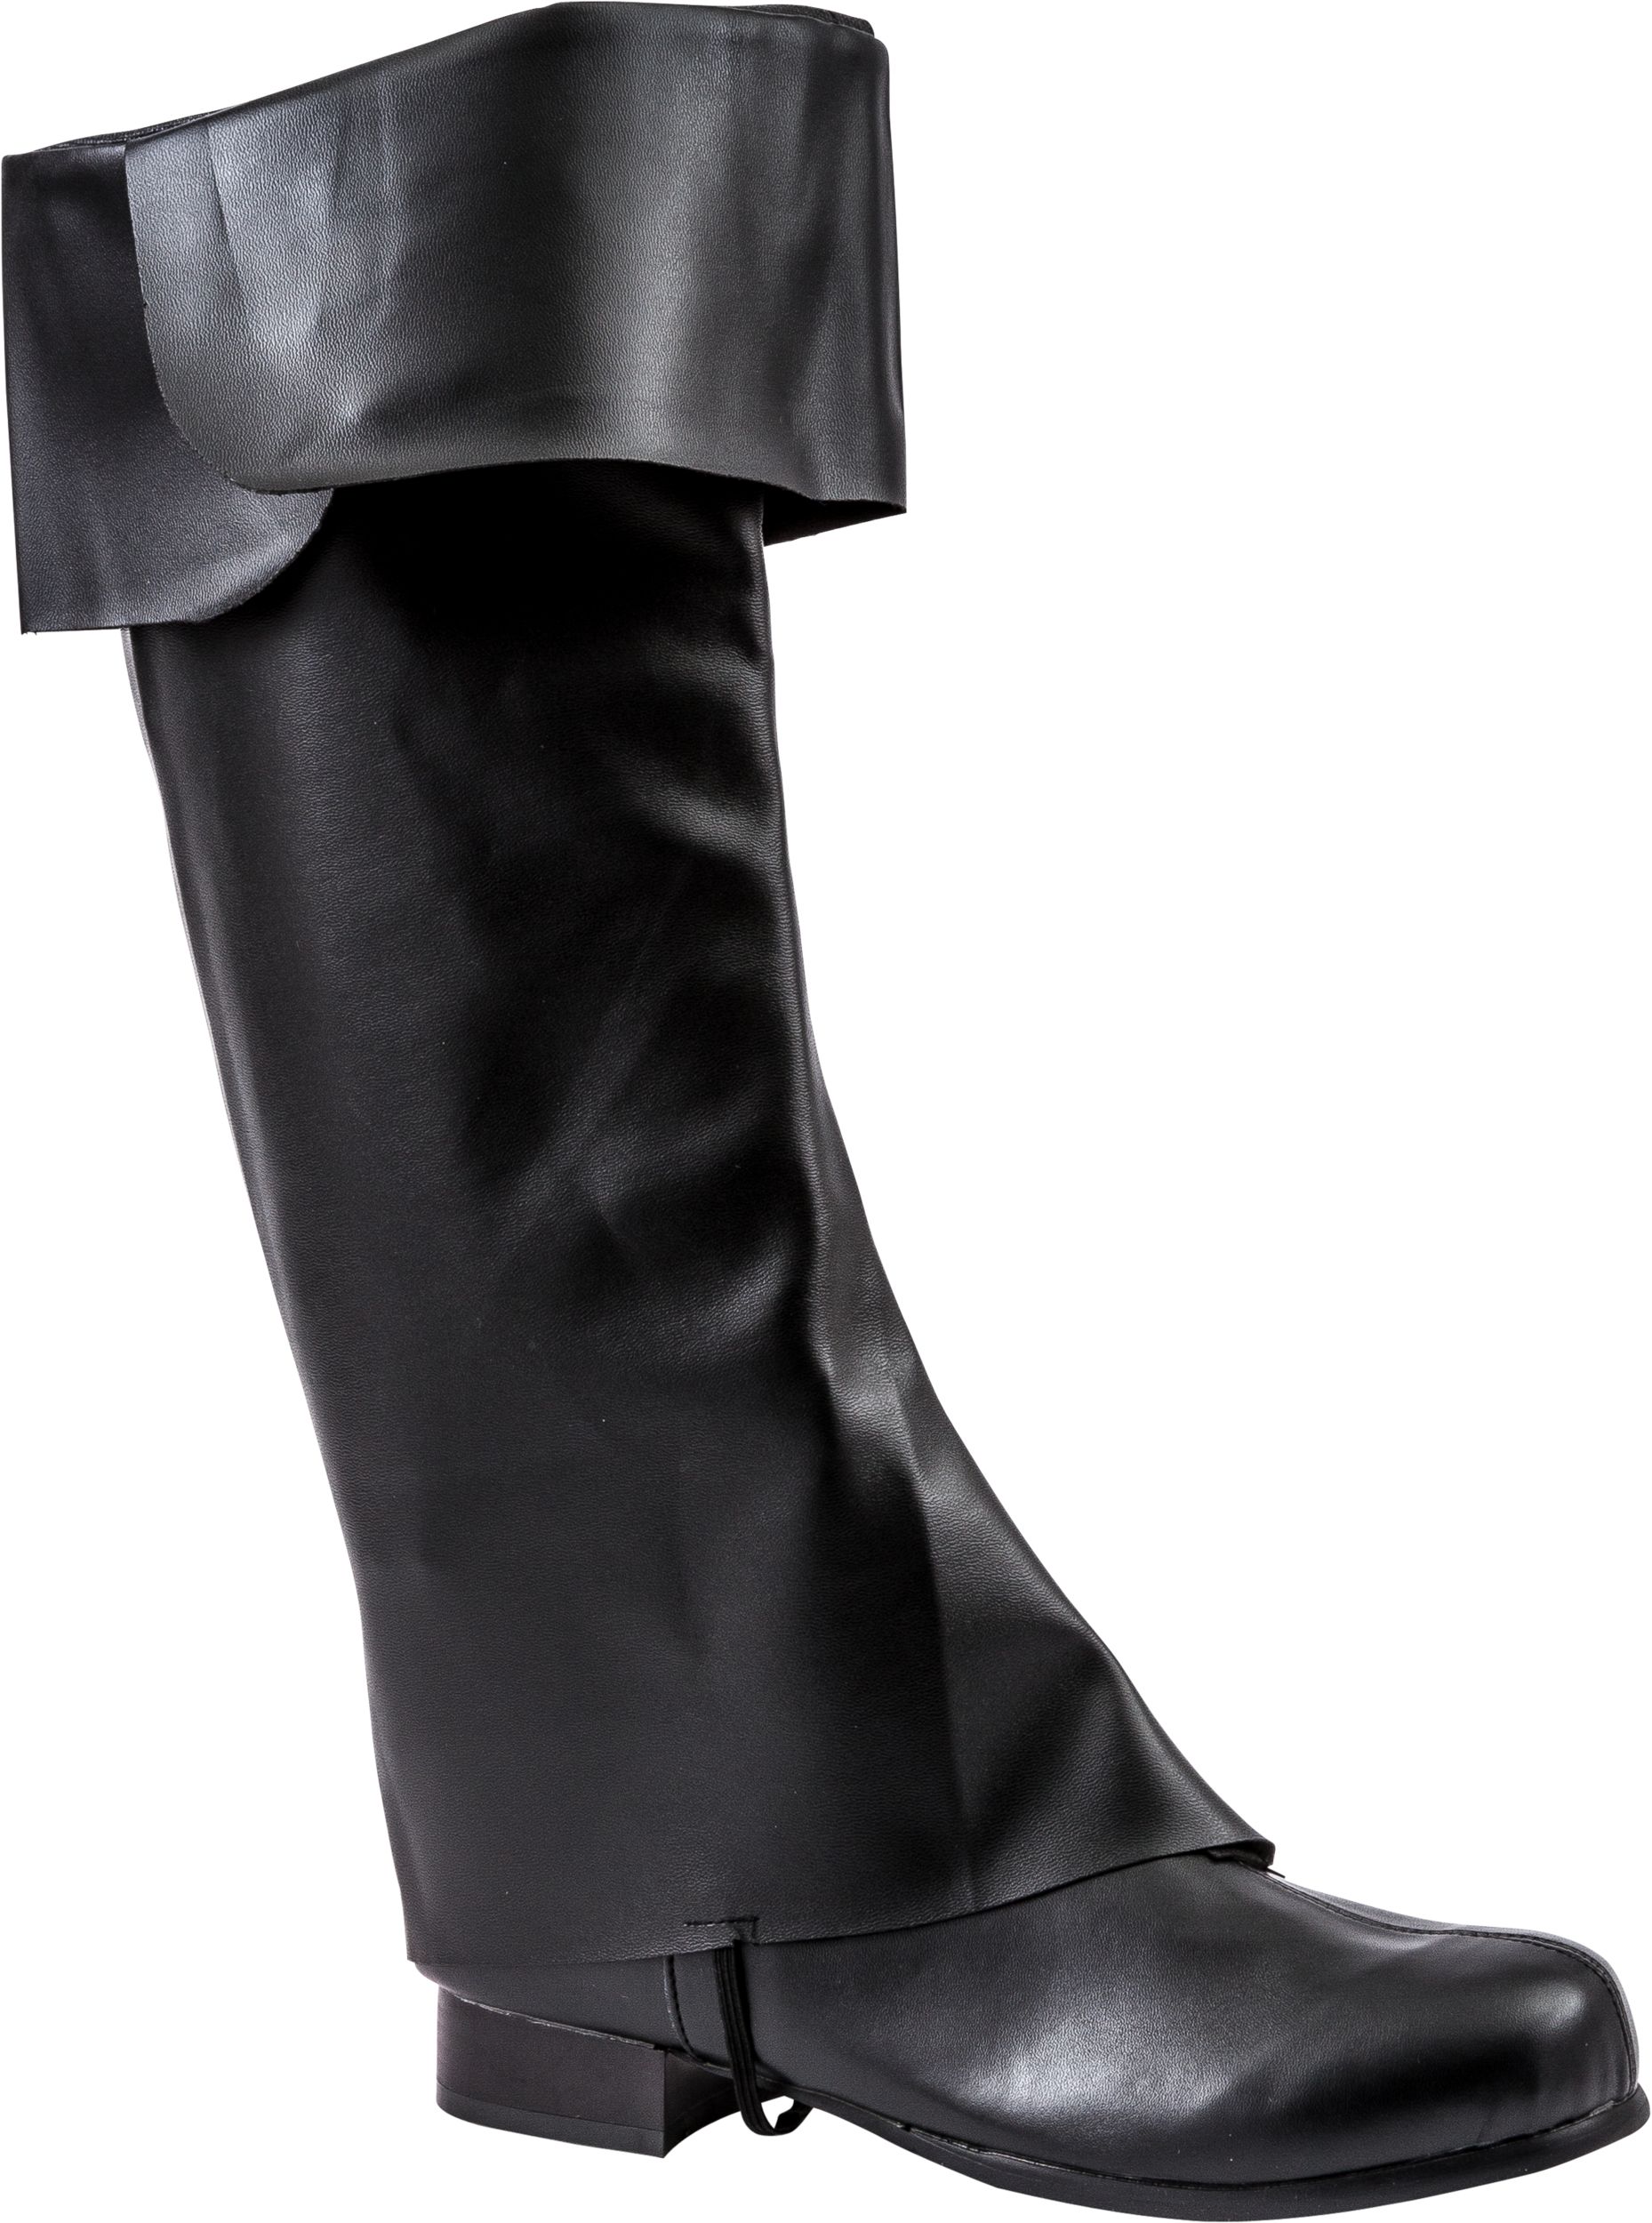 https://media-www.partycity.ca/product/seasonal-gardening/party-city-seasonal/party-city-halloween-and-fall-decor/8517789/adult-pirate-boot-covers-c1929d79-dd49-4dc1-9b9f-a5ae12477452-jpgrendition.jpg